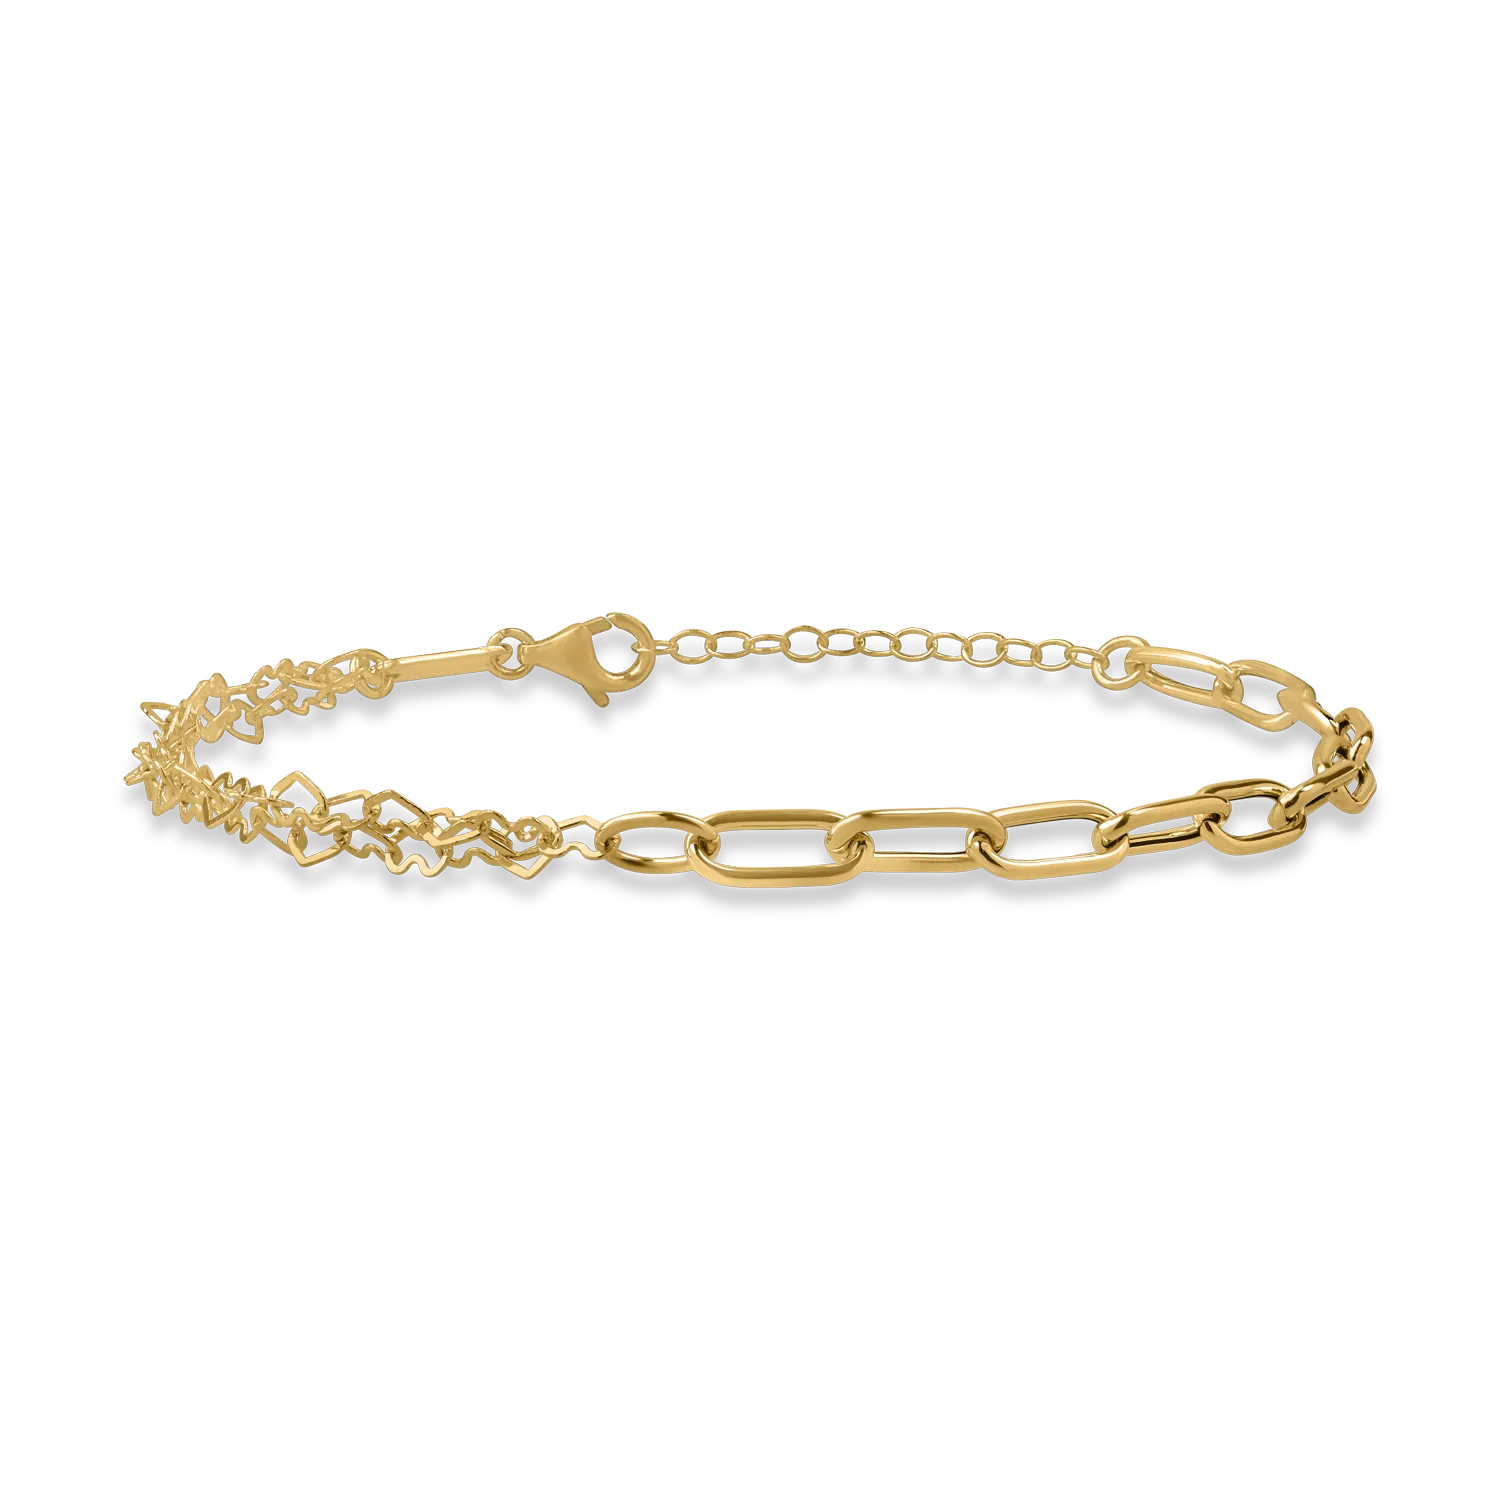 Yellow gold link chain and hearts bracelet